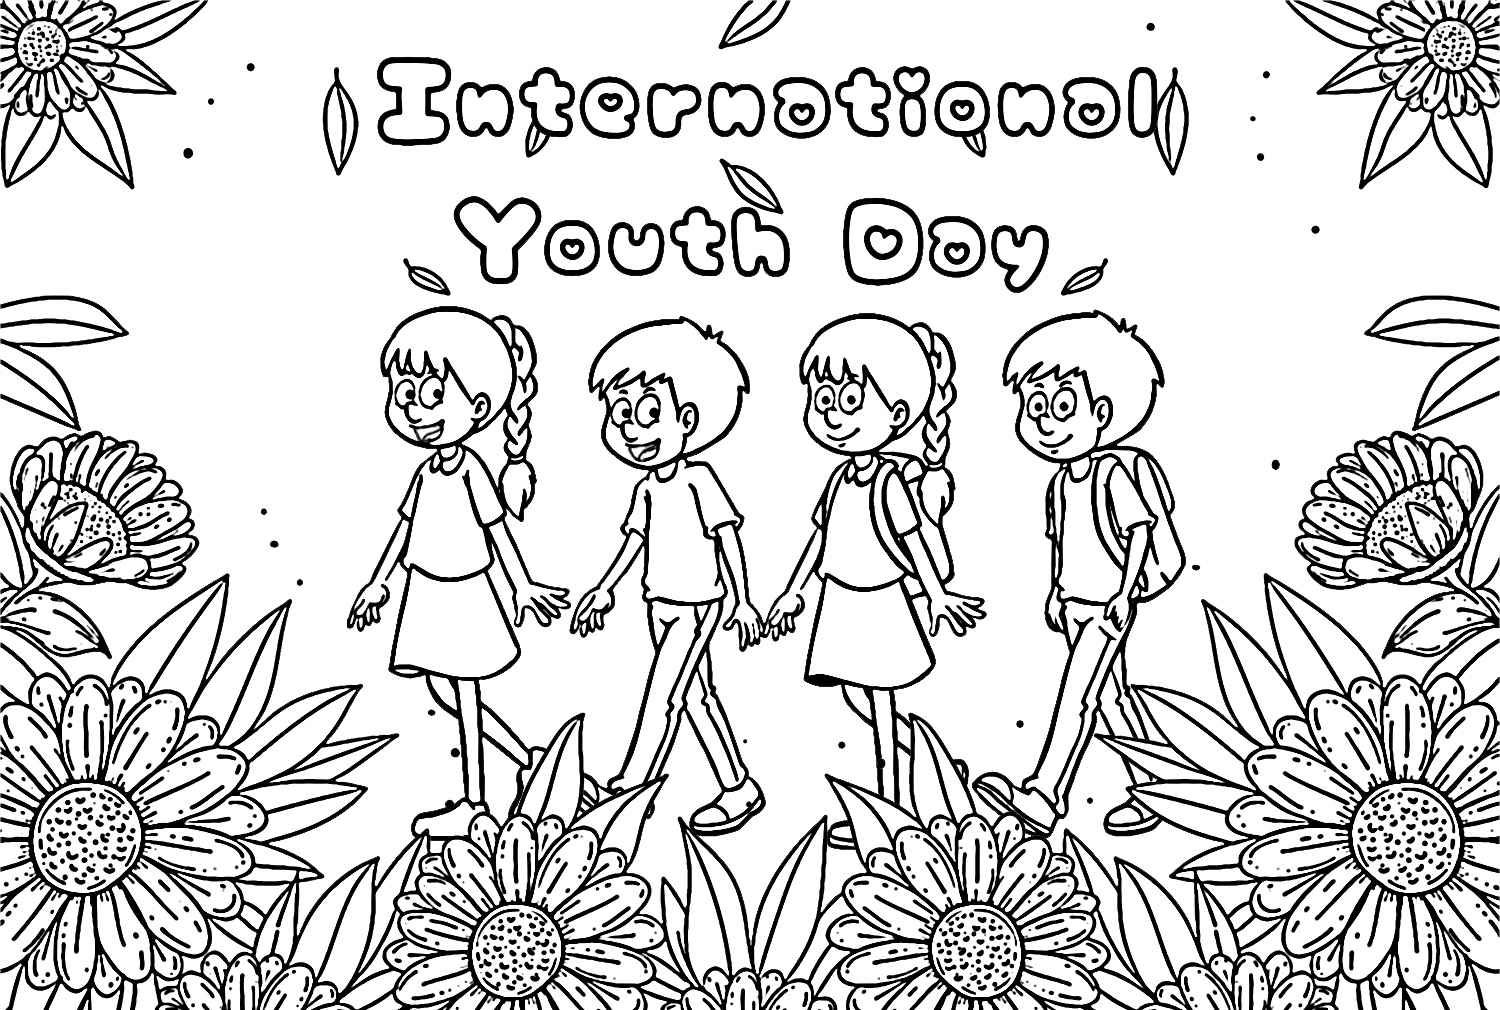 Coloring Sheets International Youth Day from International Youth Day